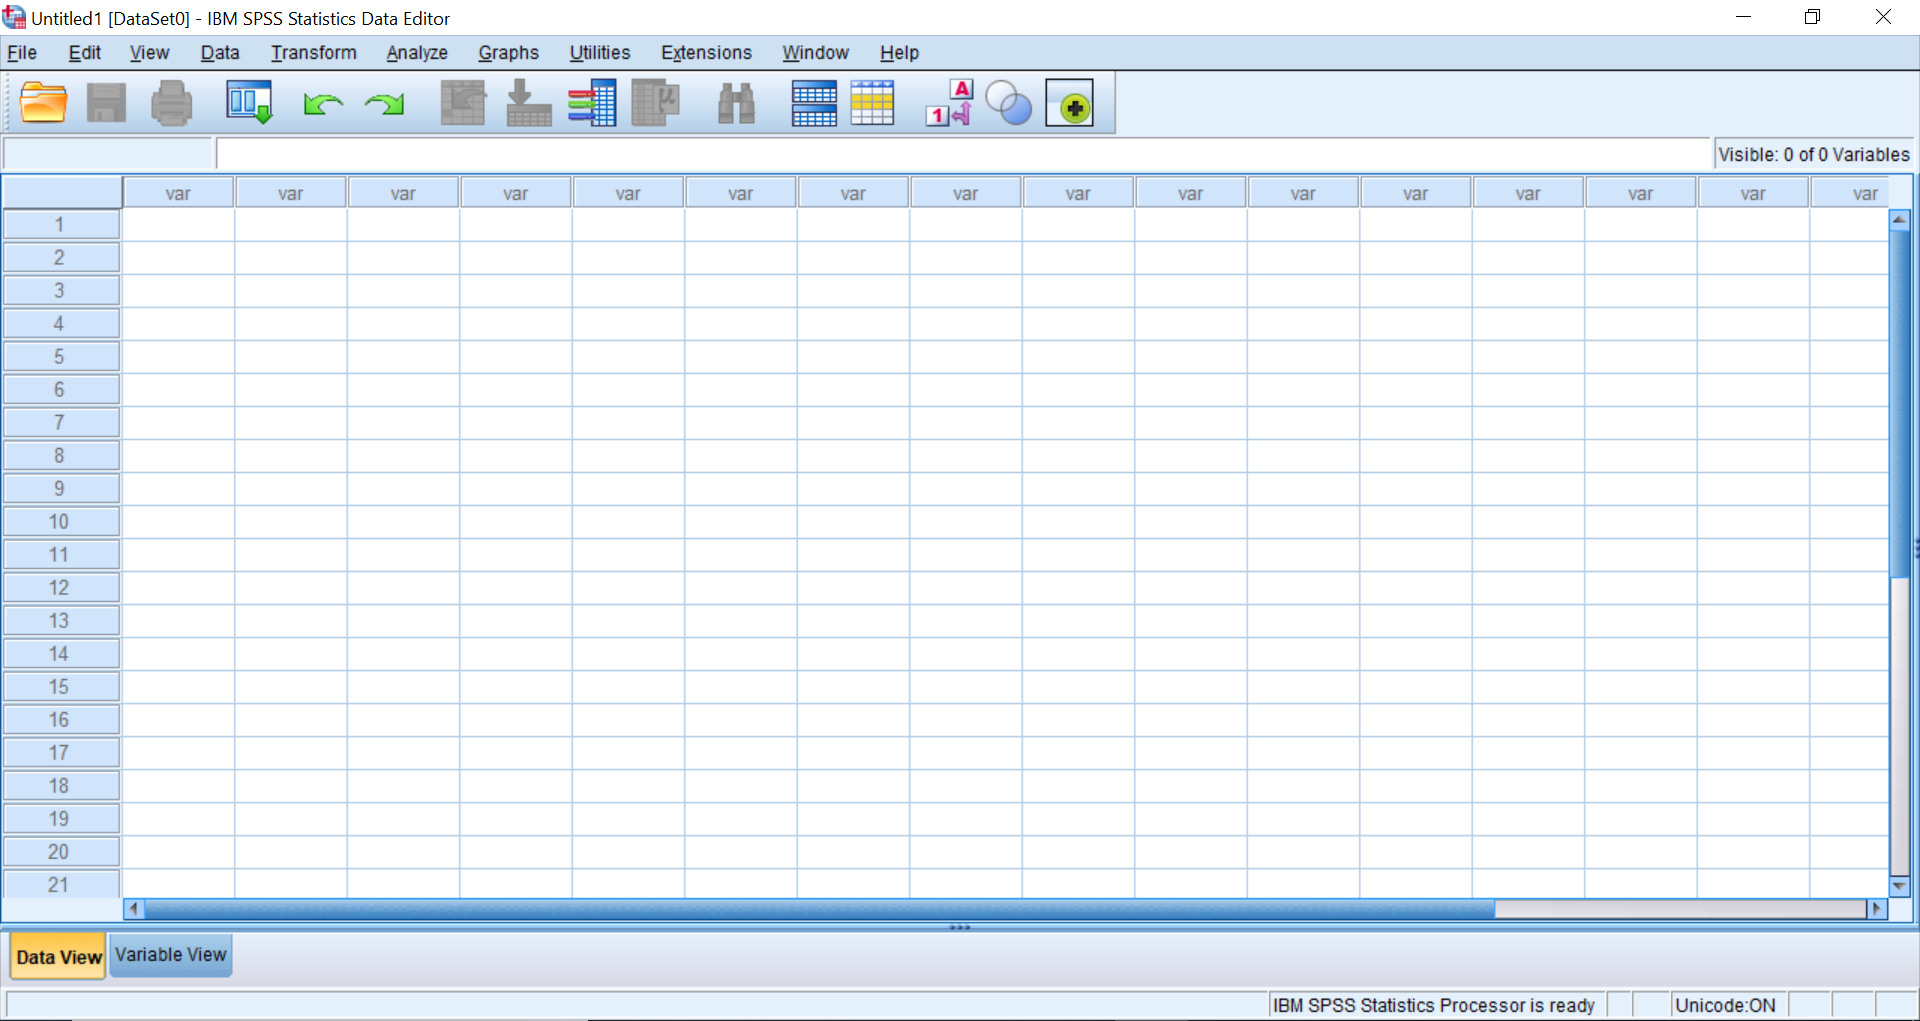 A fresh install of SPSS version 26